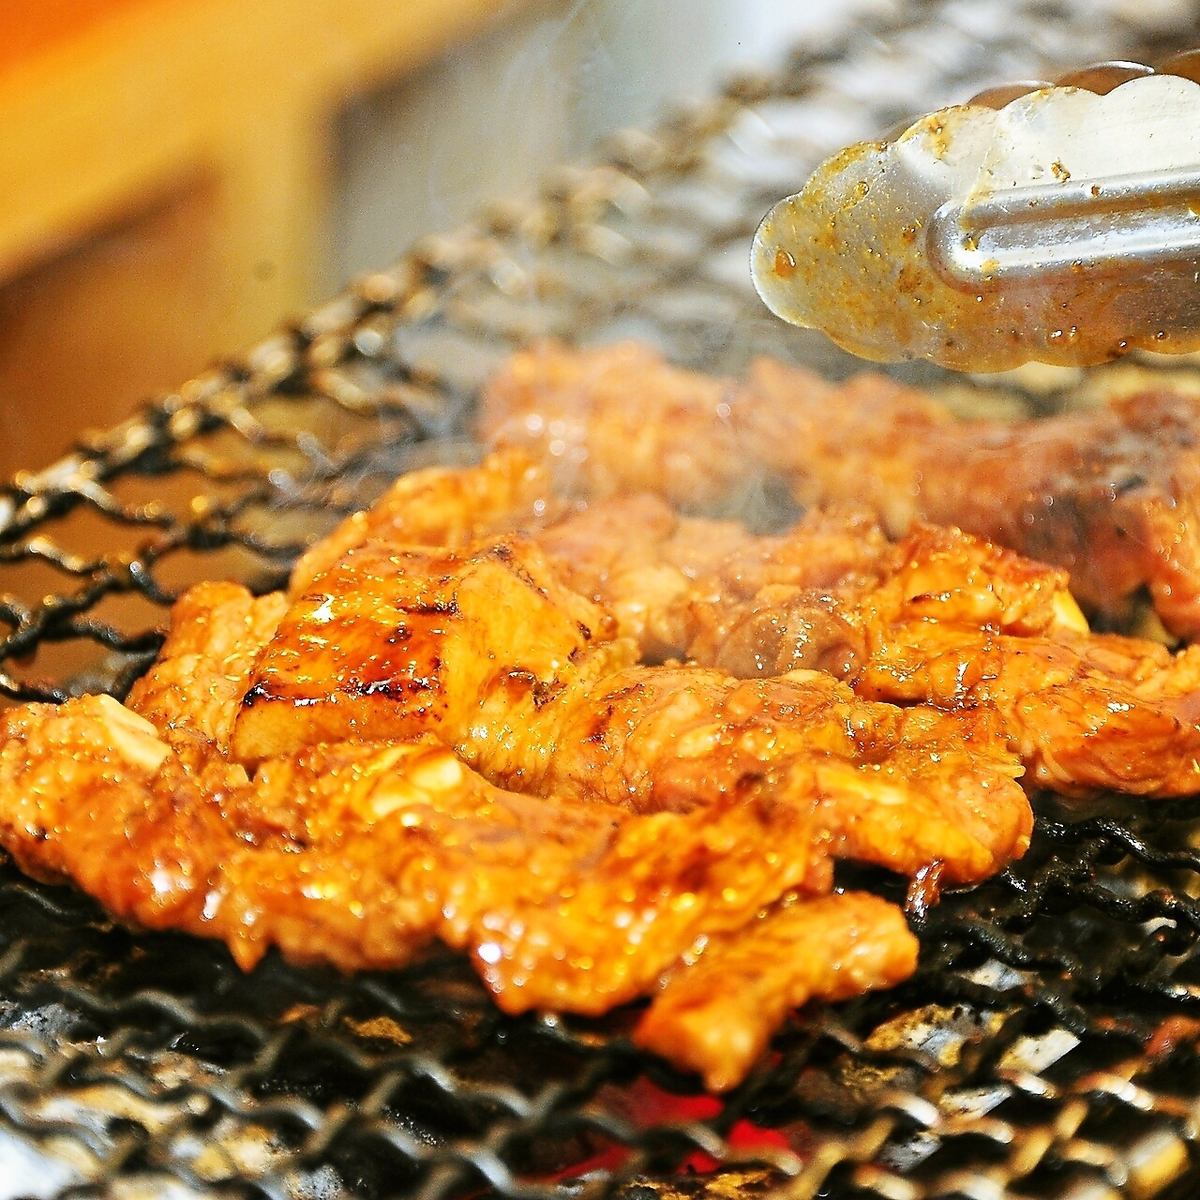 The yakiton (grilled Seto Momiji pork) ground in the morning is a must-try.